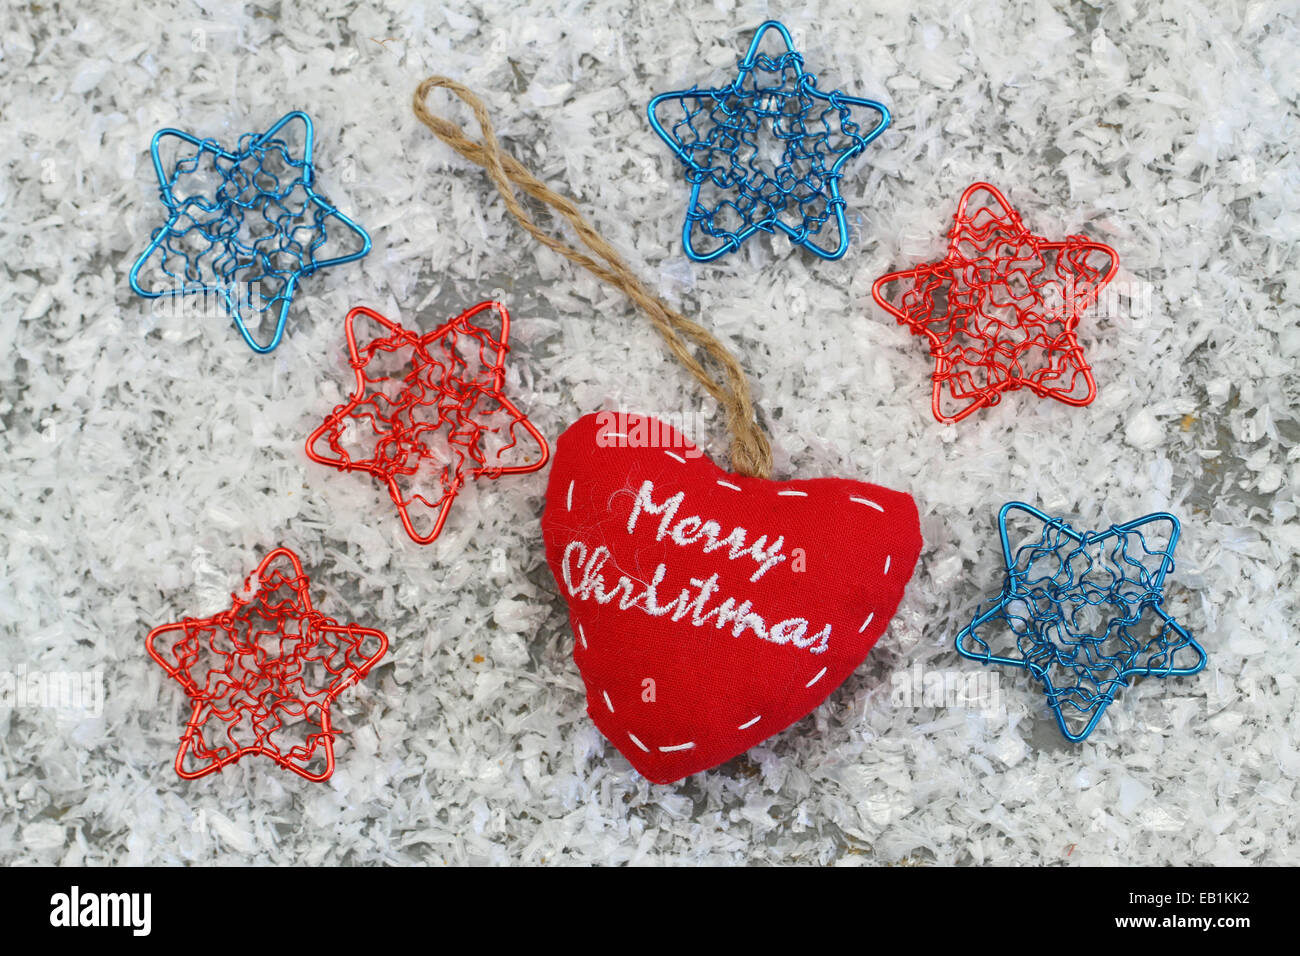 Merry Christmas heart with colorful stars on snowy surface Stock Photo